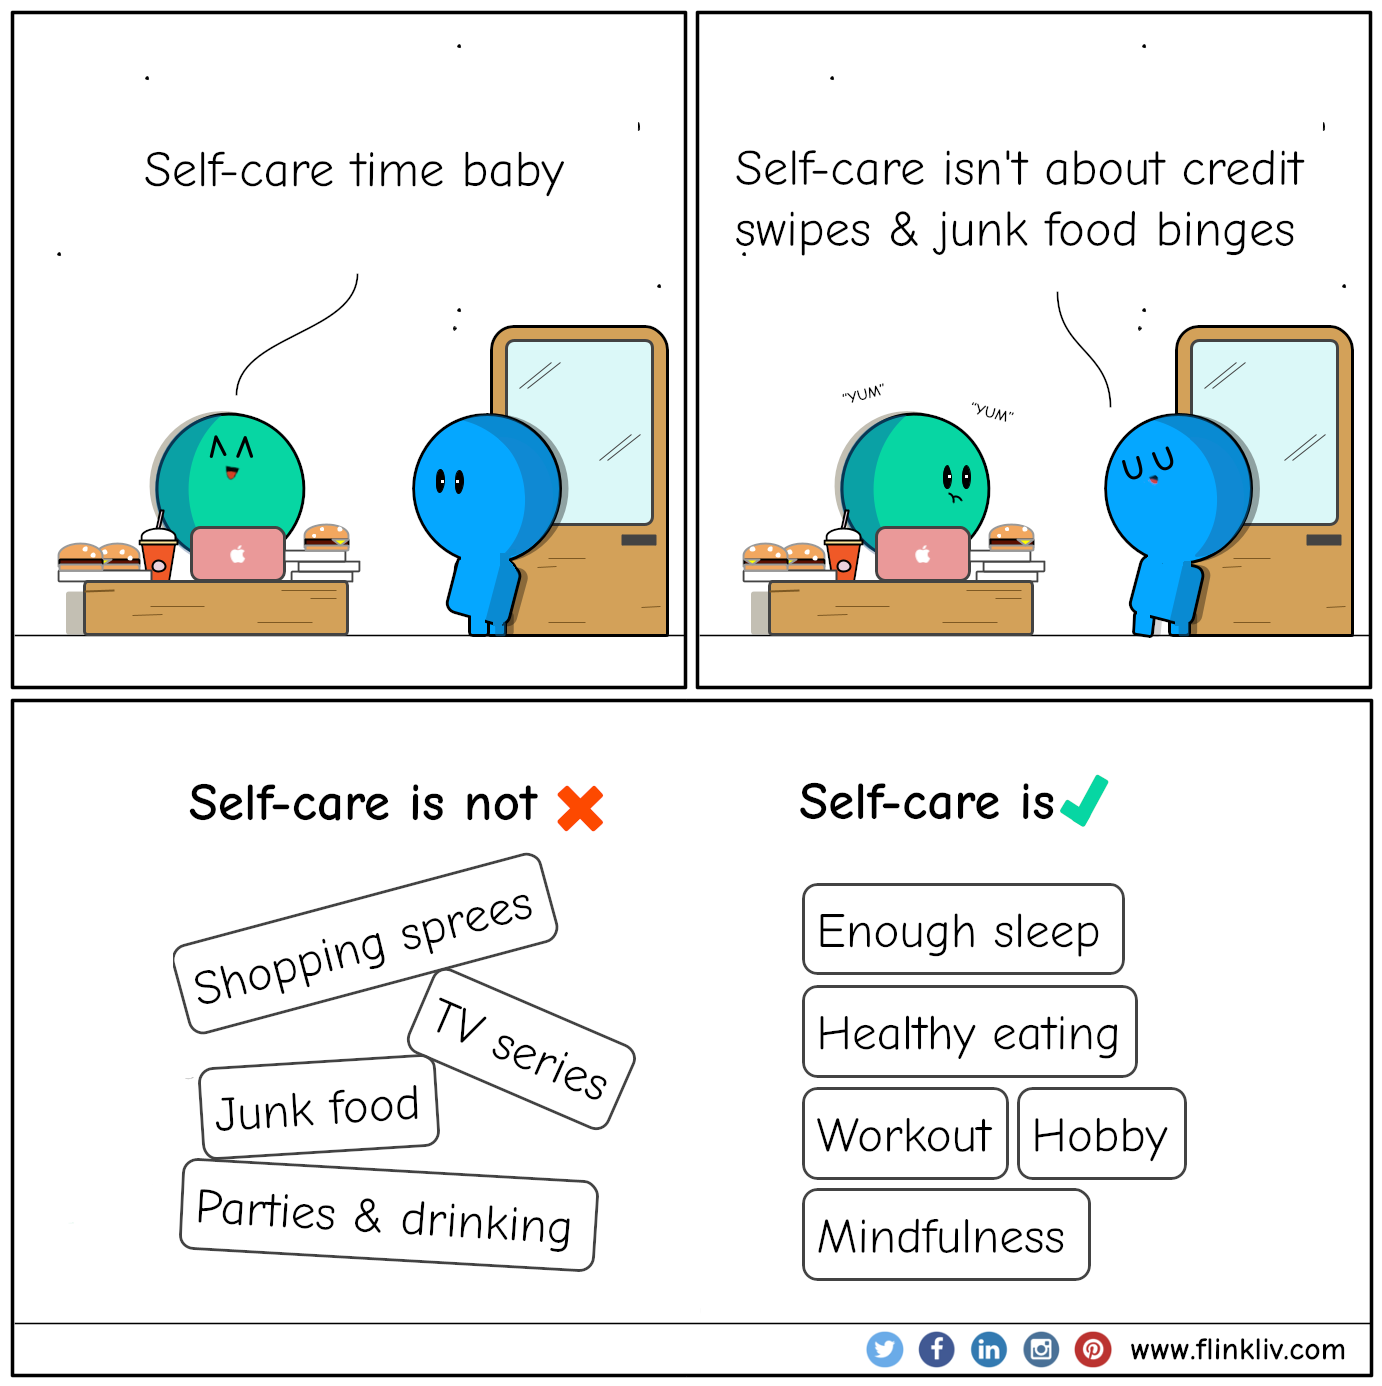 Conversation between A and B about what is self-care. A: Self-care time baby
B: Self-care isn't about credit swipes and junk food binges. By flinkliv.com